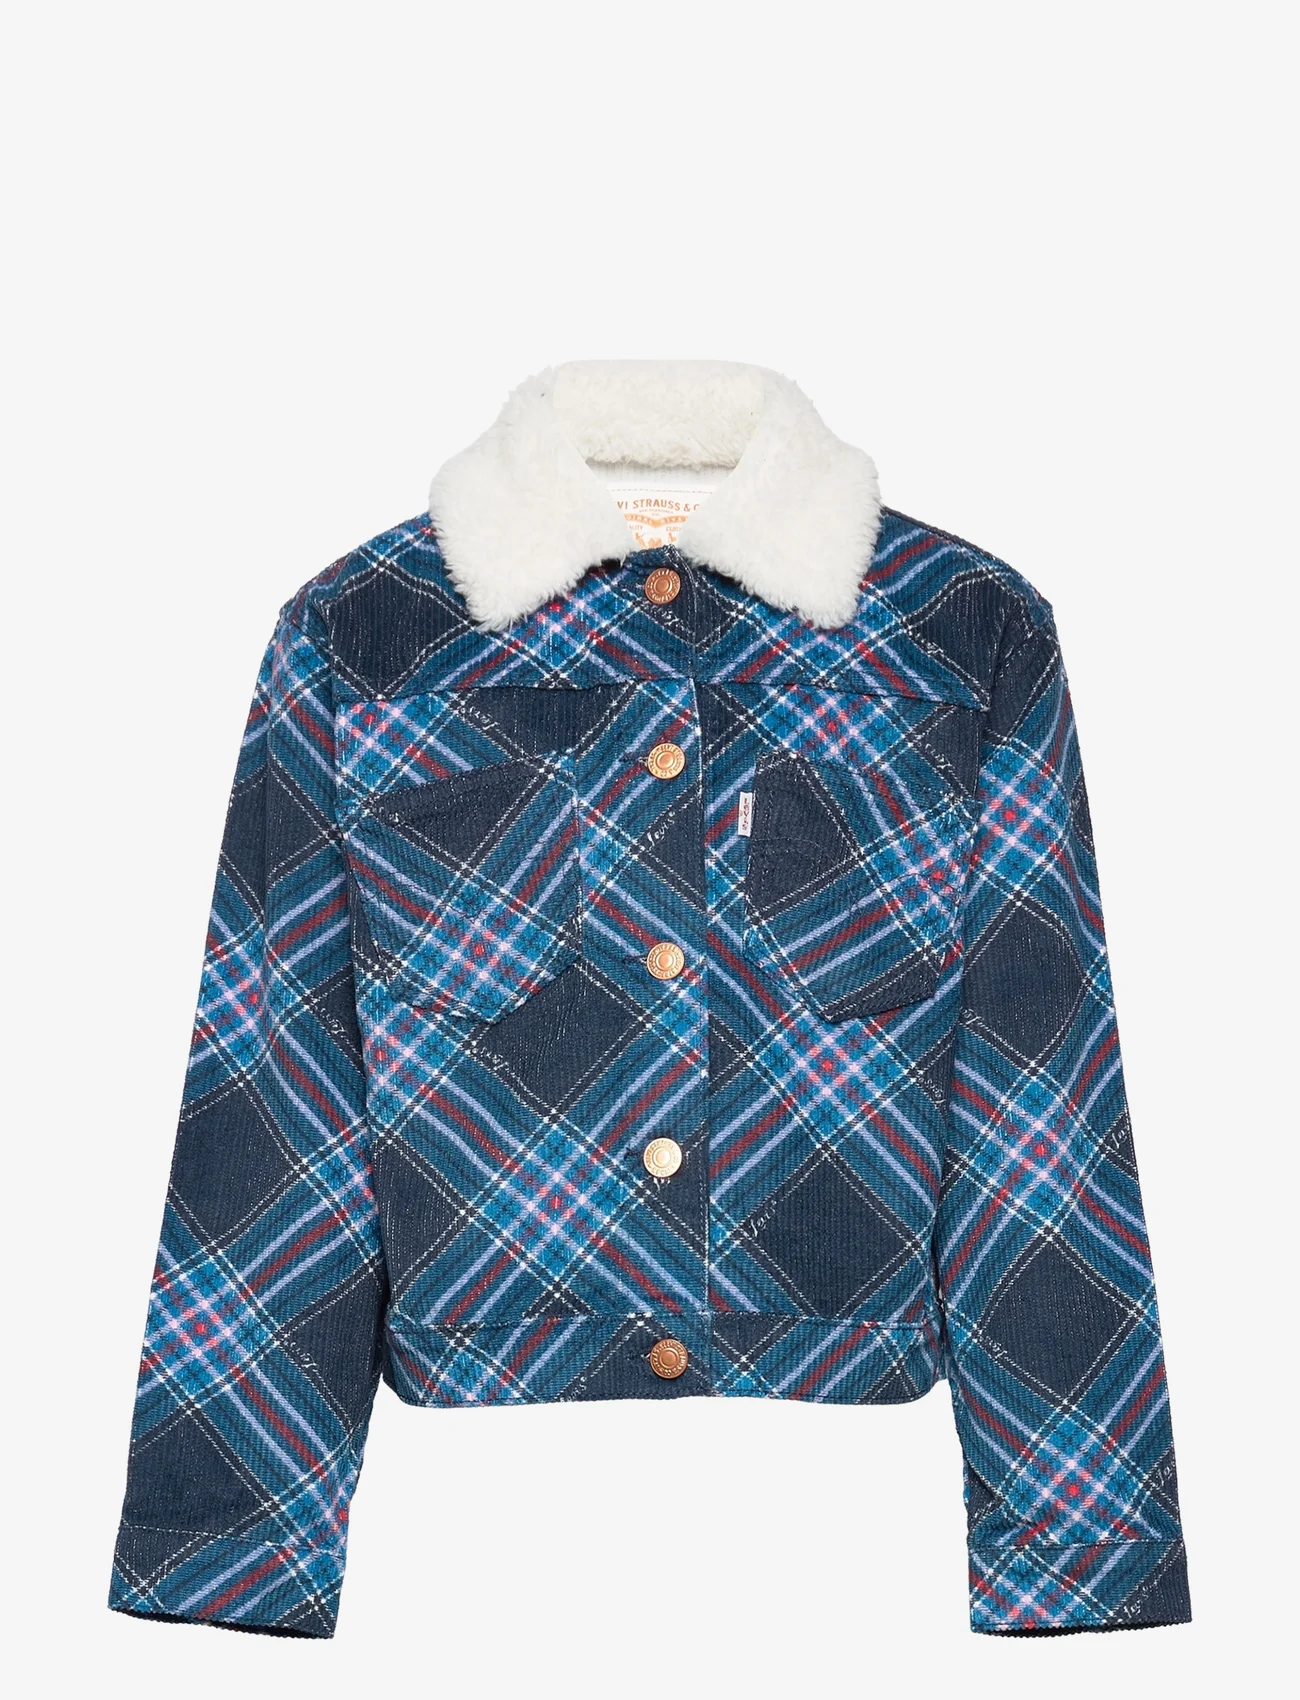 Levi's Lvg Printed Corduroy Jacket  €. Buy Jackets from Levi's  online at . Fast delivery and easy returns